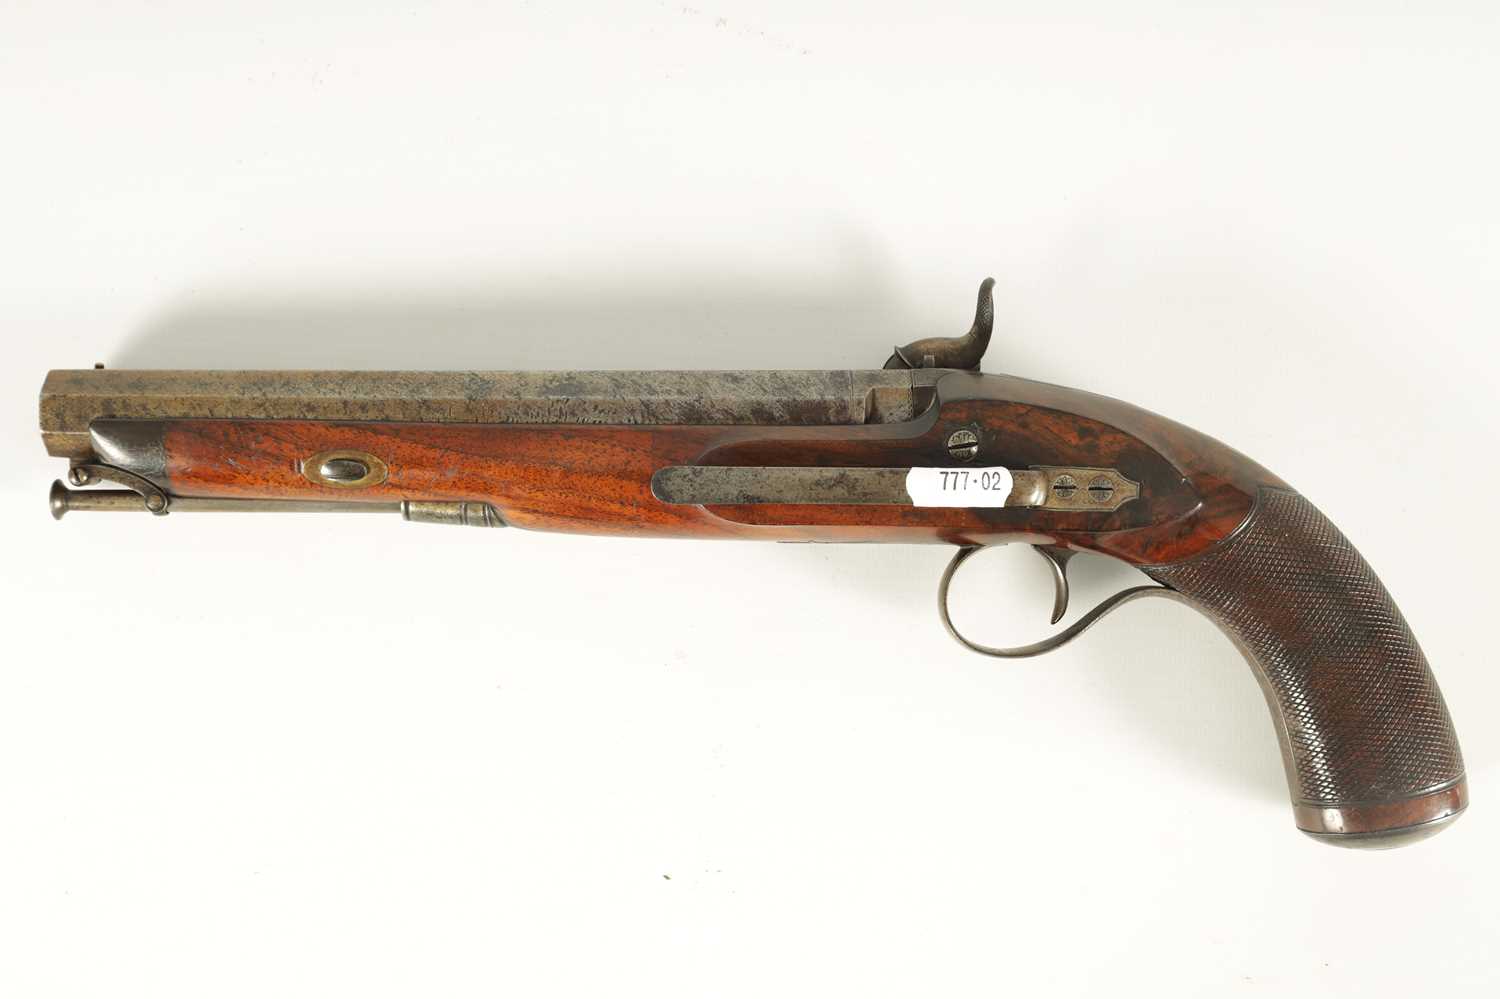 G R COLLIS, BIRMINGHAM. AN EARLY 19TH CENTURY WALNUT PERCUSSION HOLSTER PISTOL - Image 7 of 10